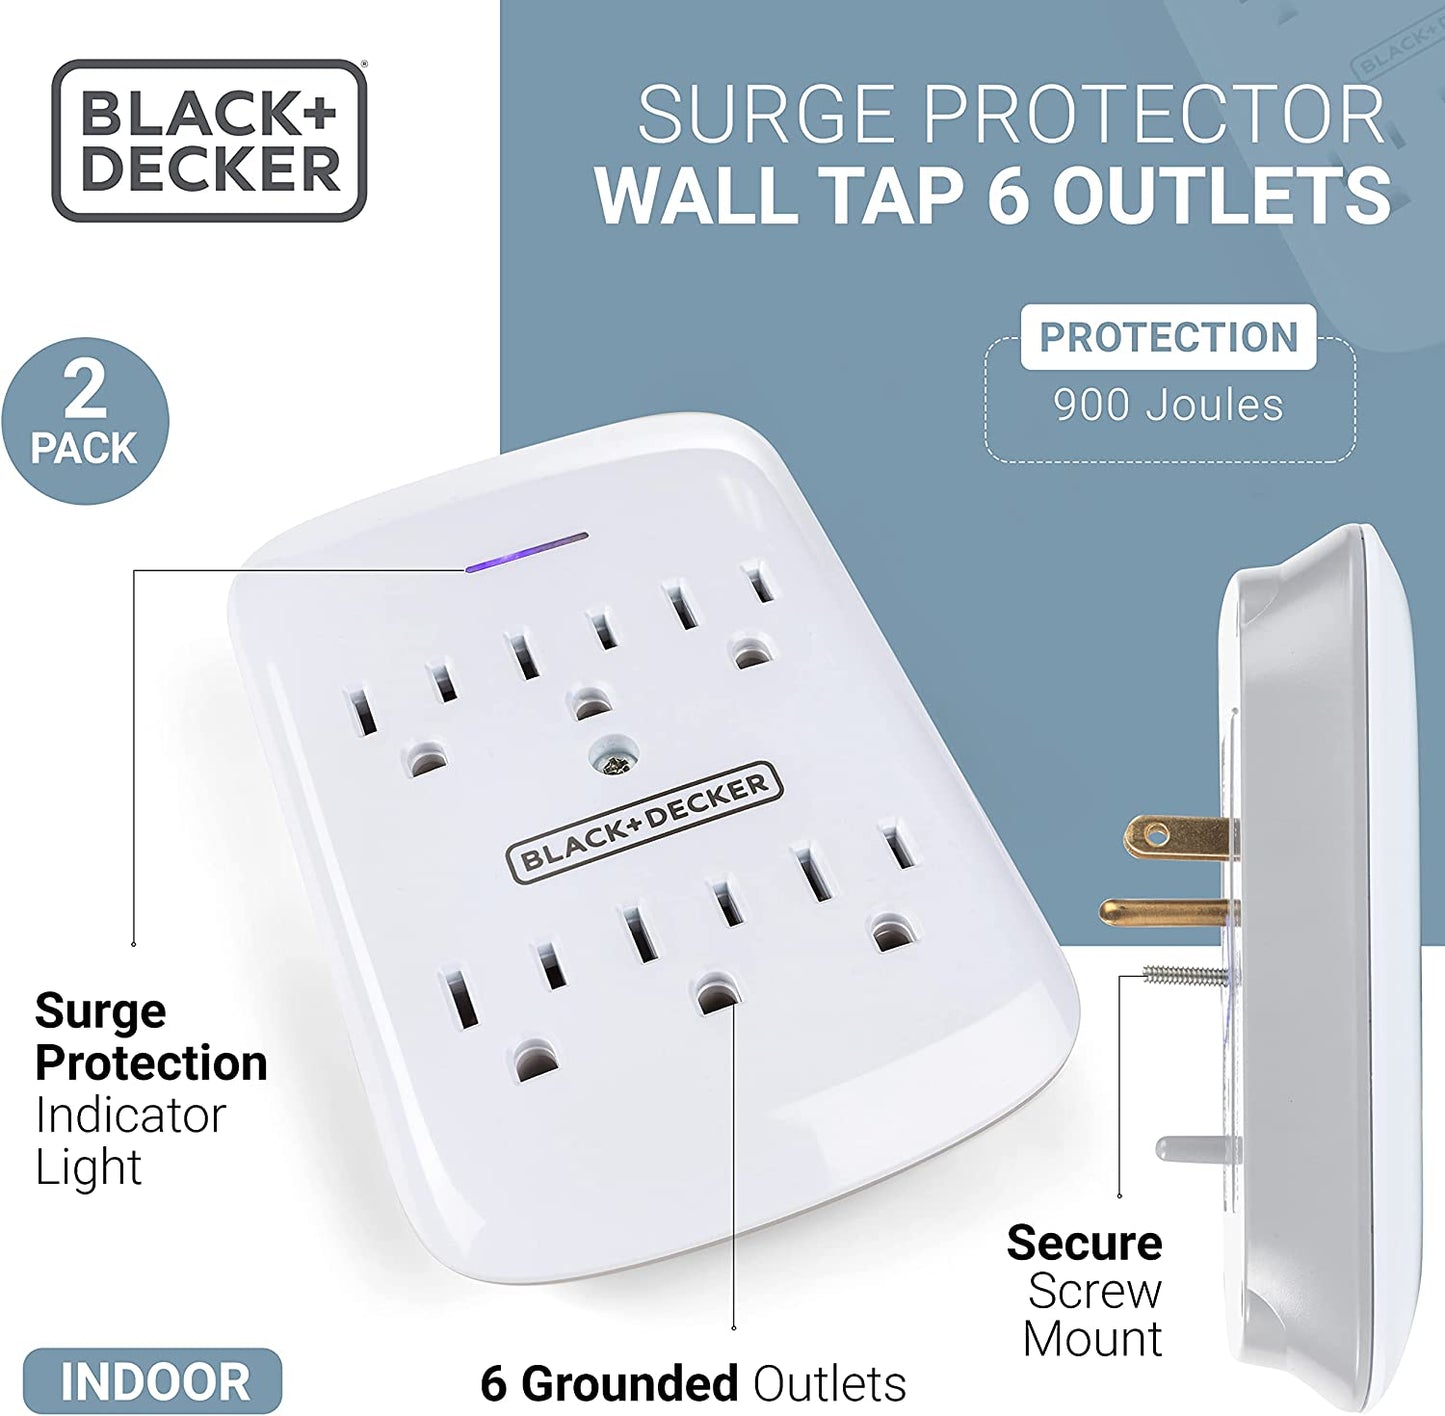 BLACK+DECKER Surge Protector Wall Mount with 6 Grounded Outlets, 2 Pack, White - Compact Power Adapter Tap with Indicator Light, Automatic Shutdown - 3-Prong Power Outlet Plug for Bathroom, Bedroom